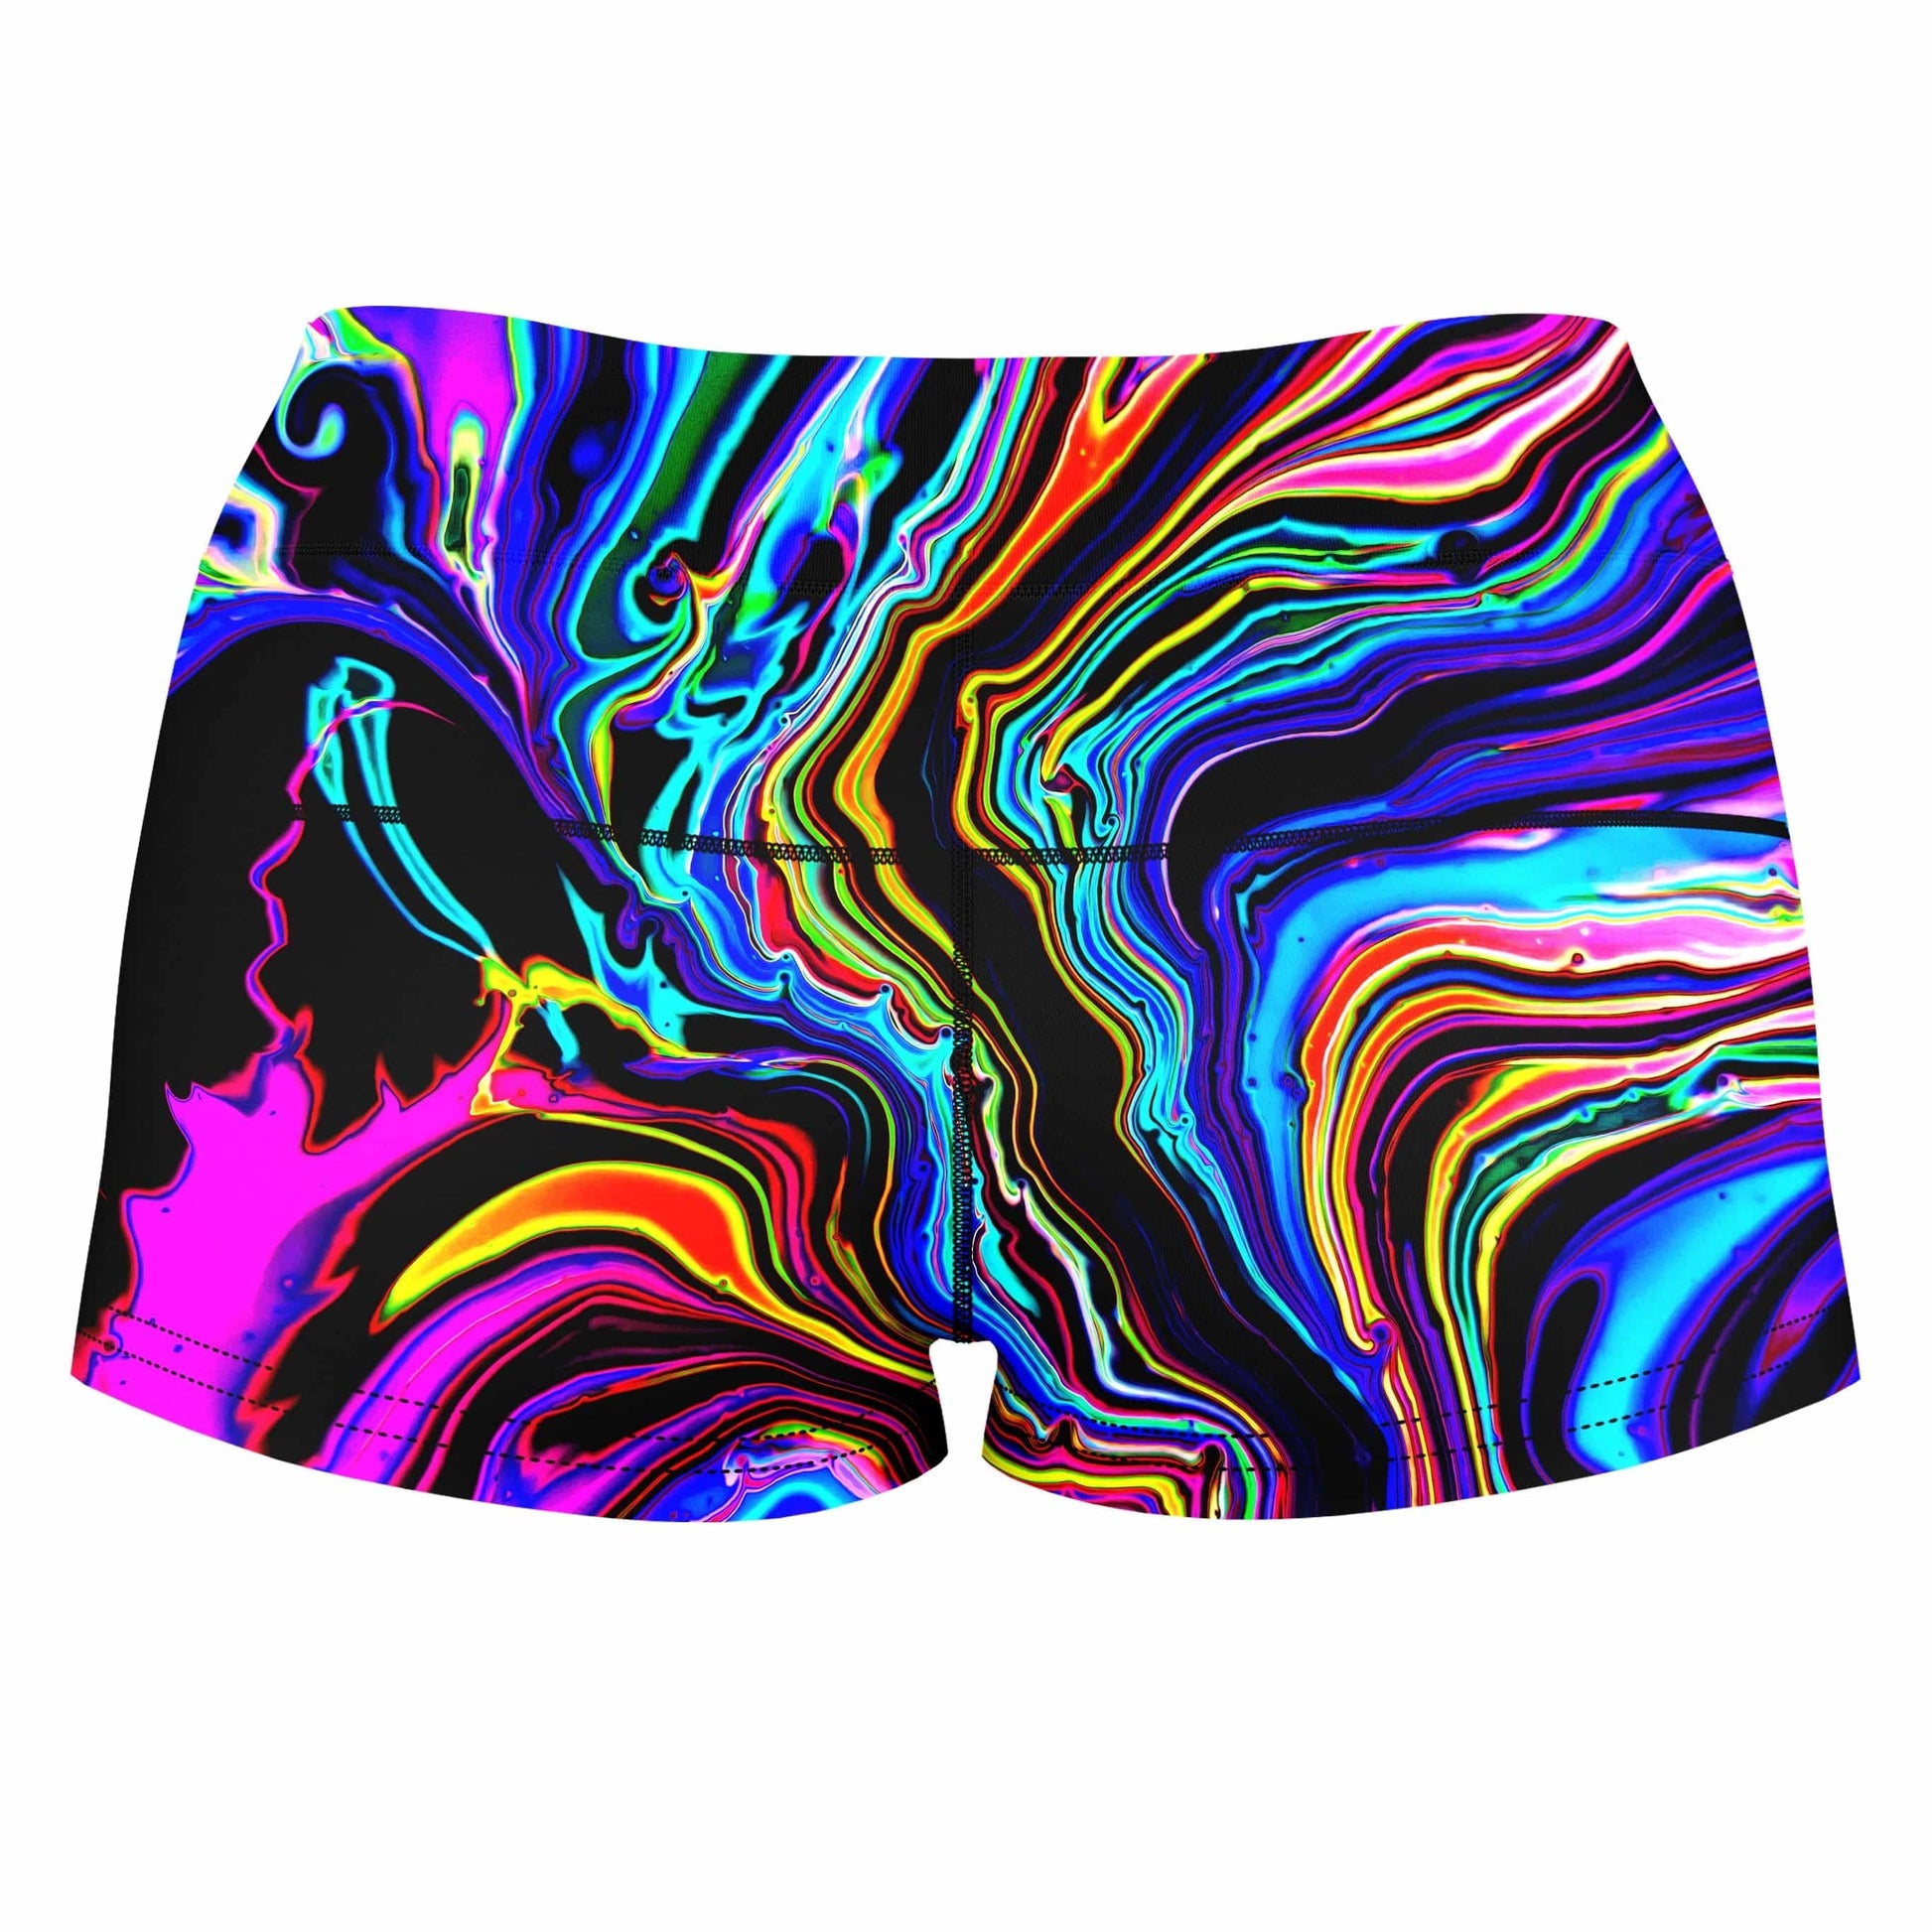 Neon Rift High-Waisted Women's Shorts, Psychedelic Pourhouse, | iEDM